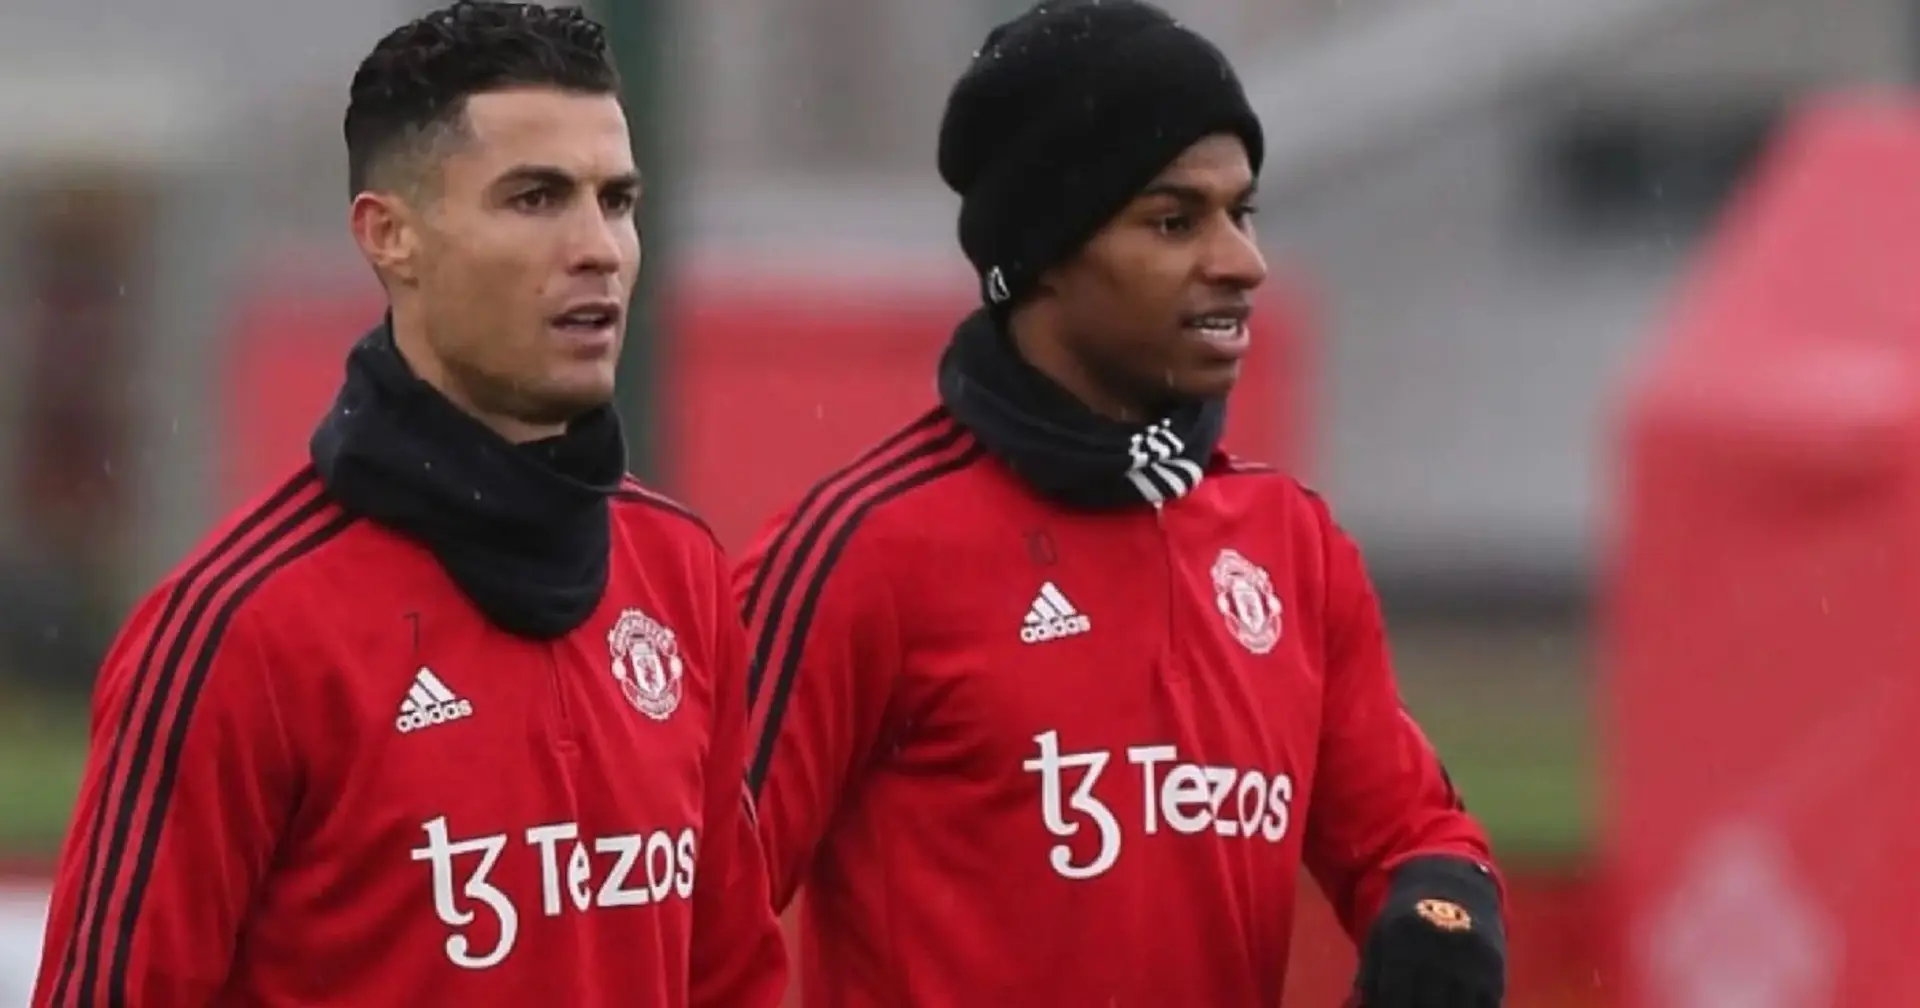 Rashford admits no one can touch a particular gift he got from Ronaldo